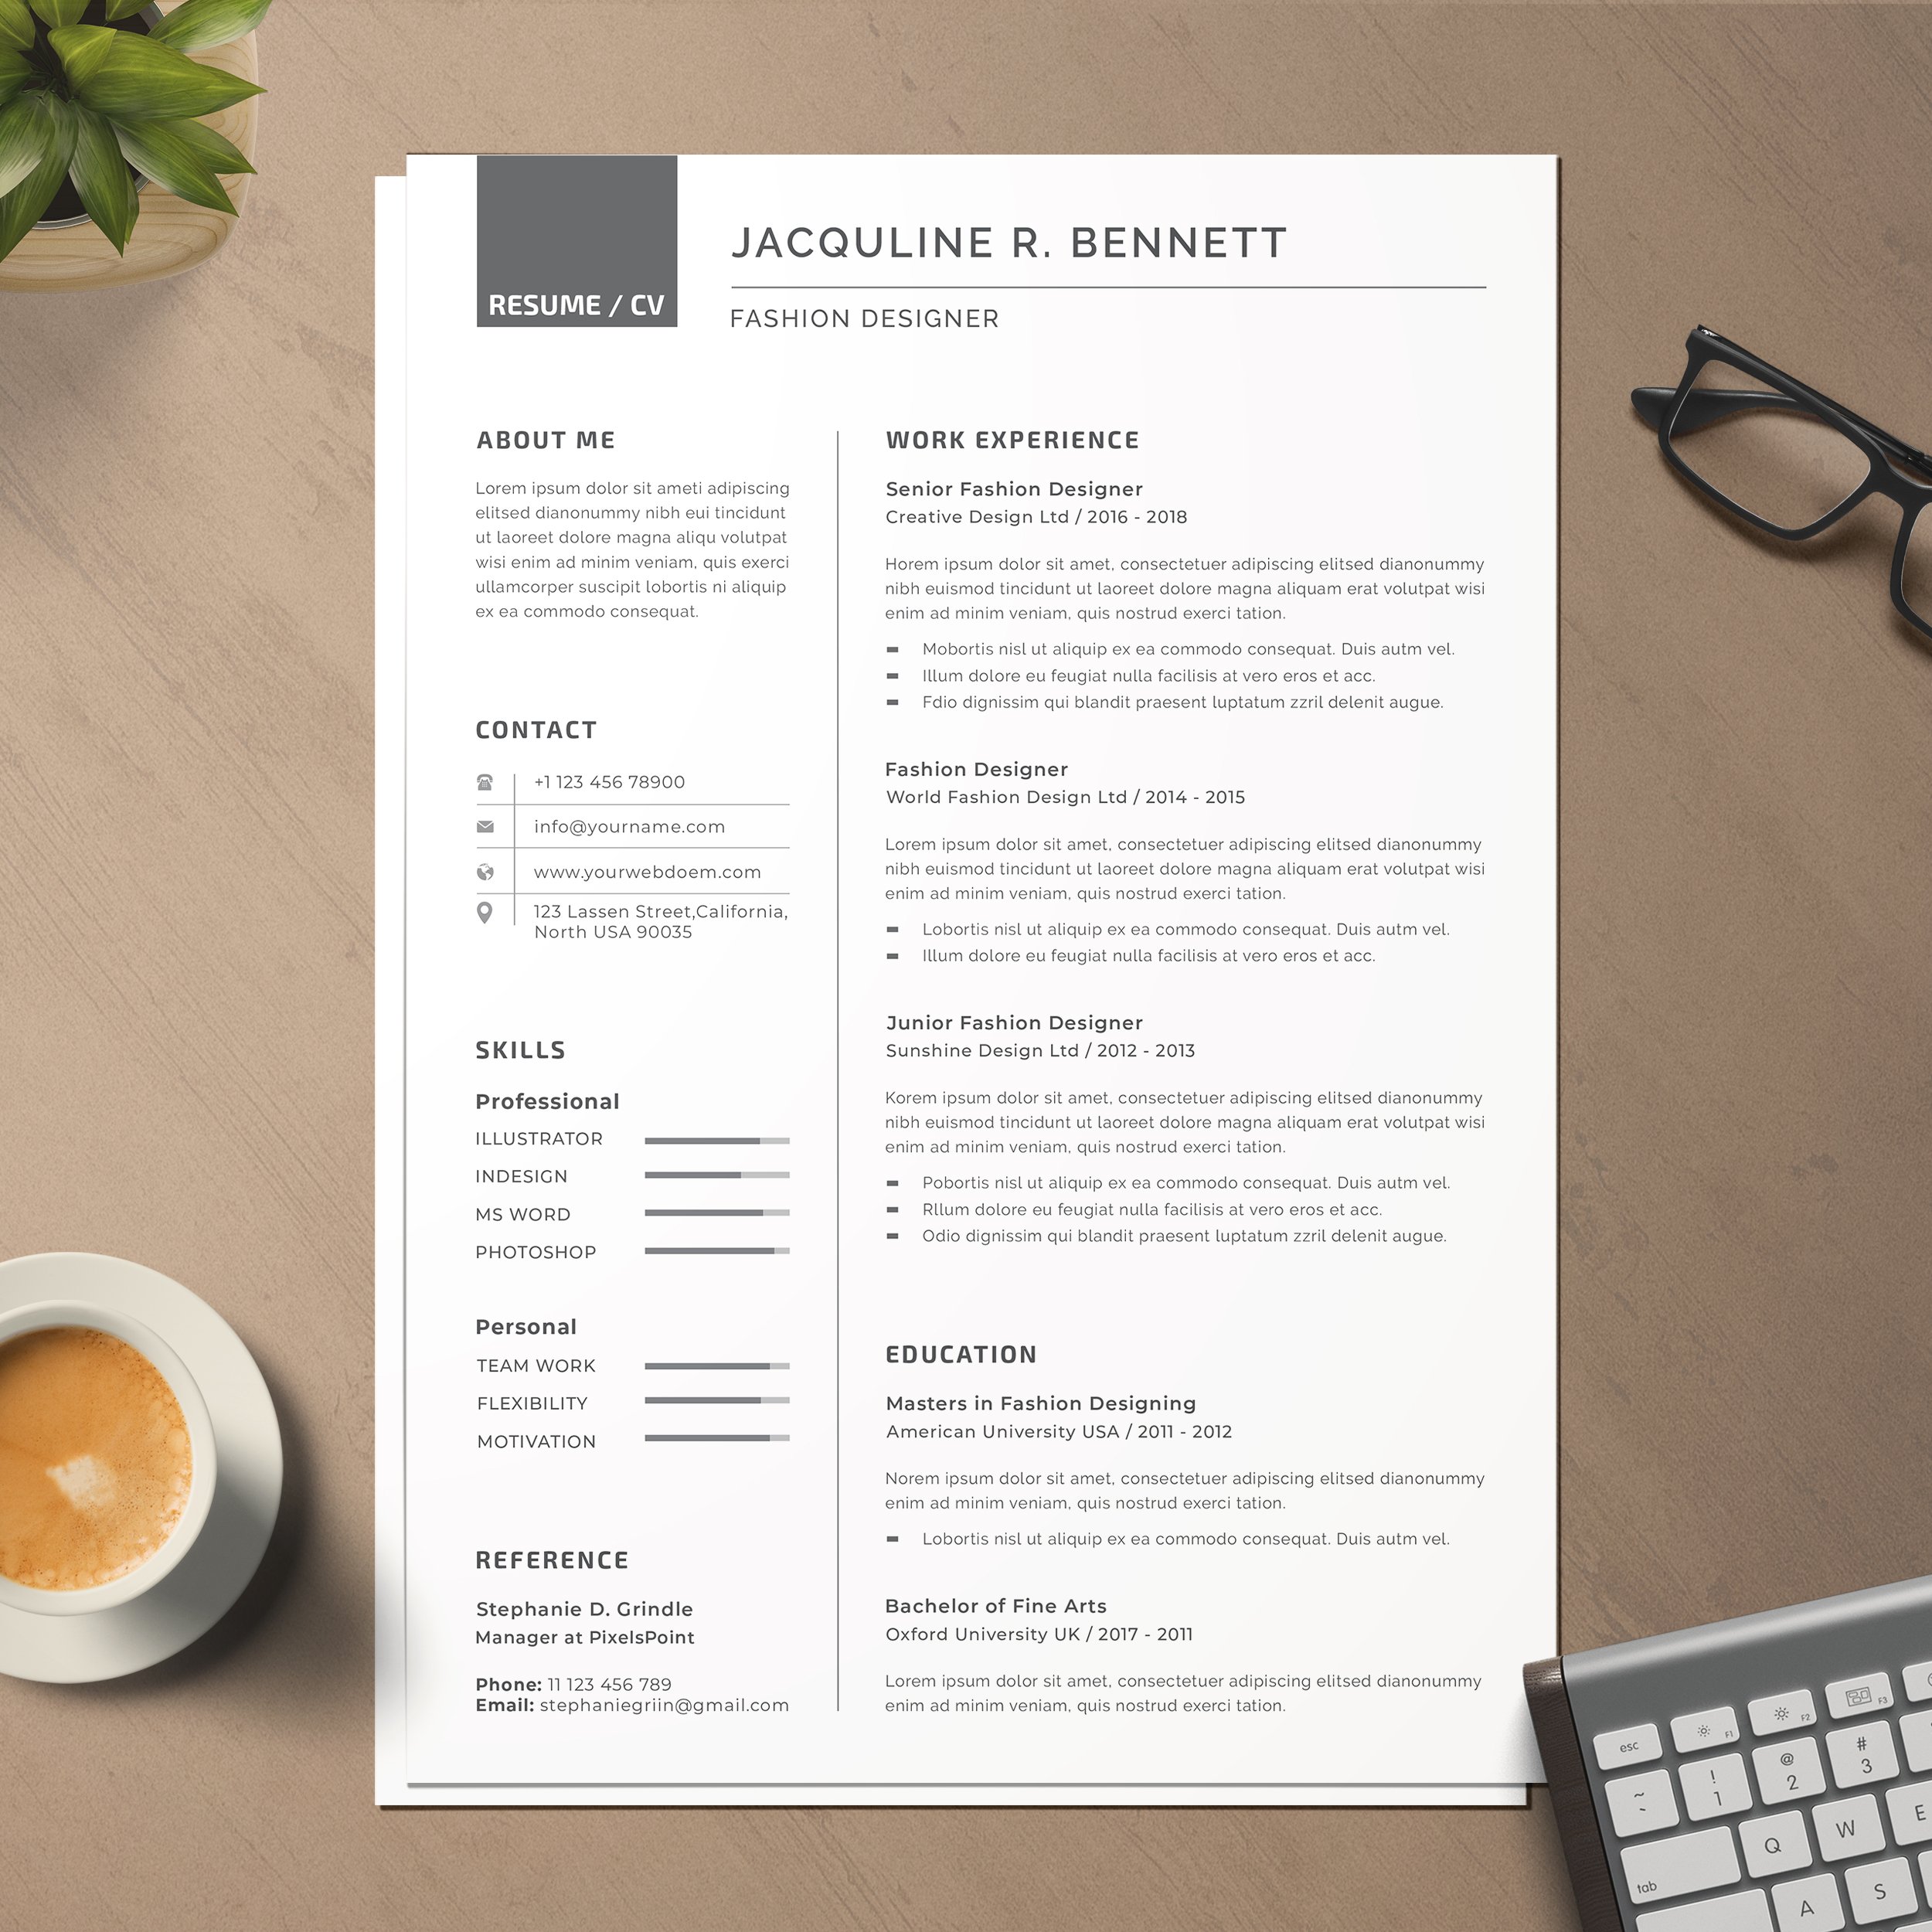 Professional resume on a desk next to a cup of coffee.